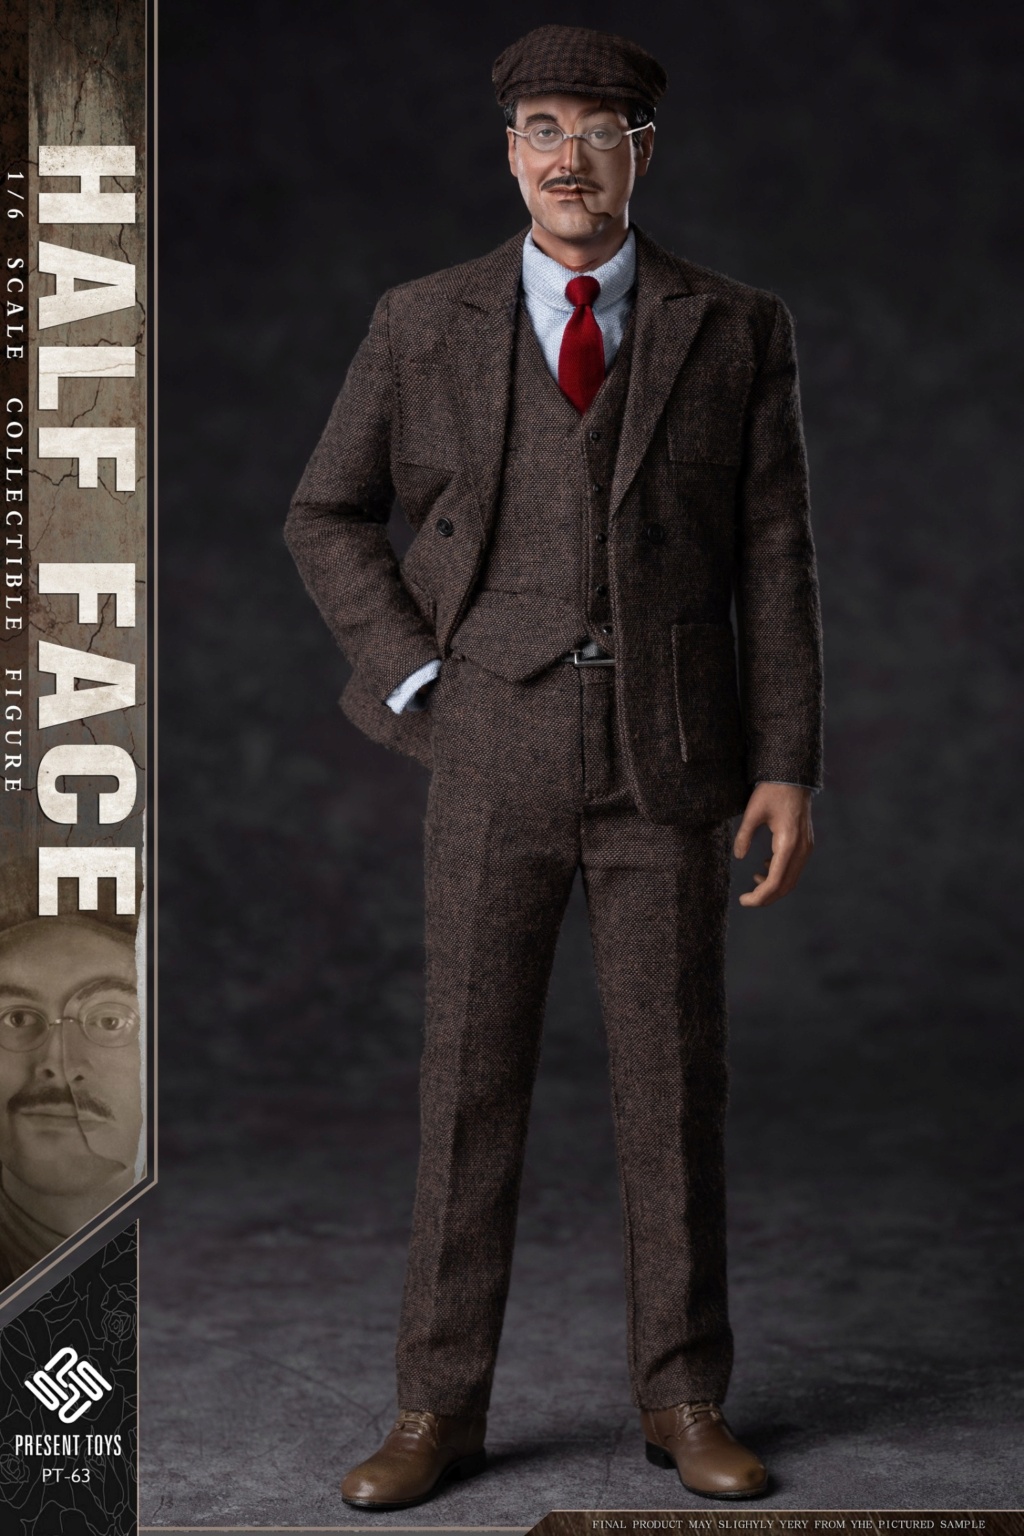 NEW PRODUCT: PRESENT TOYS  1:6 collectiblefigure – Half Face. 19270411